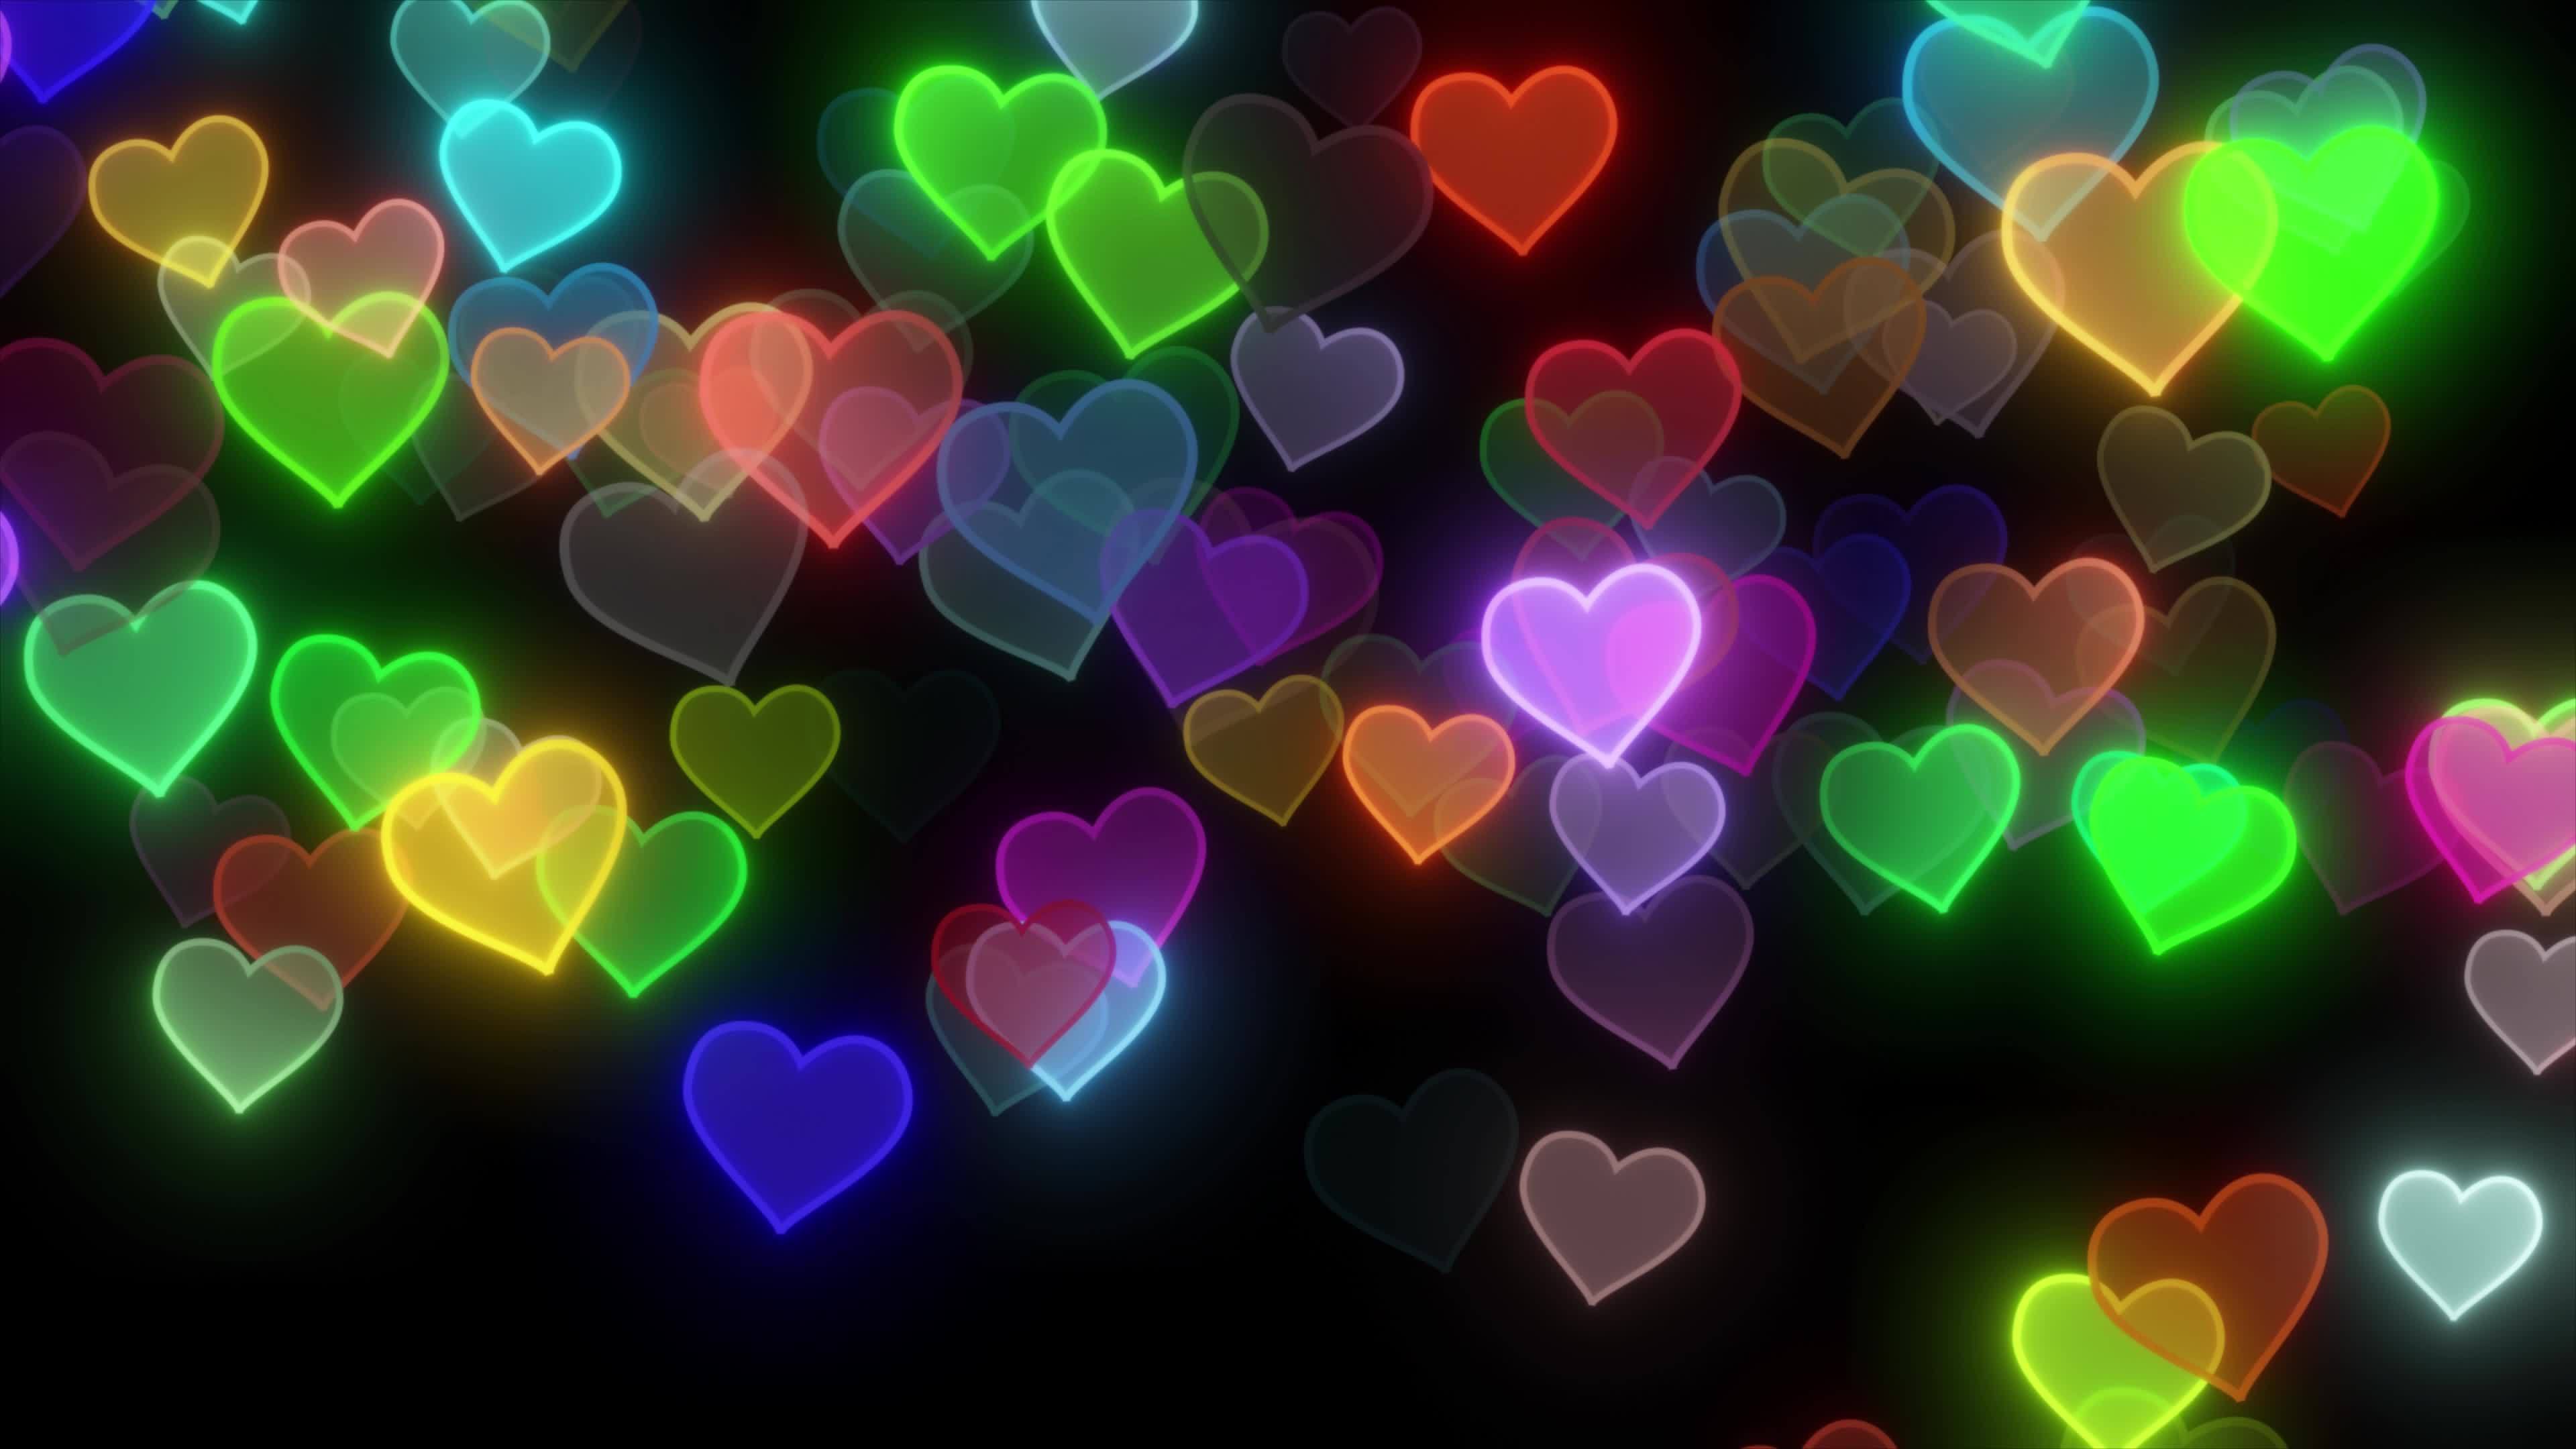 Glowing Heart Flying On Black Background. Heart Flying Valentine  Background, Neon Heart Shape Floating In The Air On Black Background.  Mother's Day , Valentine's Day Love Romantic Bg. Romantic Love 17494873  Stock